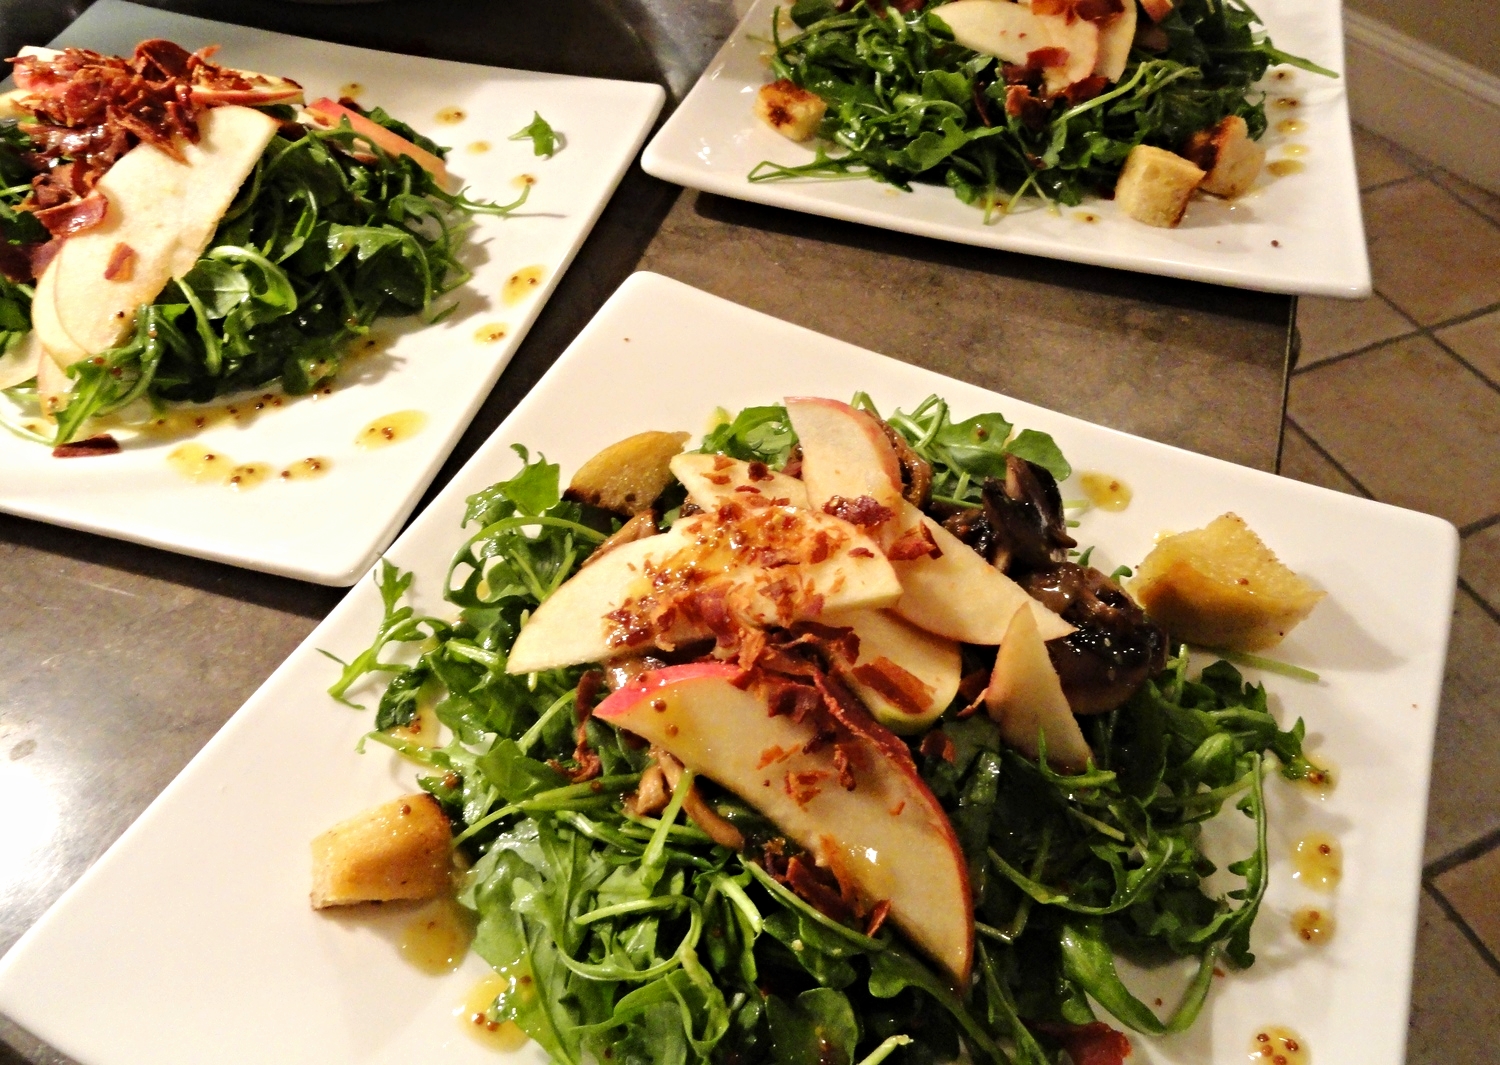 Arugula salad with apples, pecans, crumbled bacon, croutons, and whole grain mustard vinaigrette